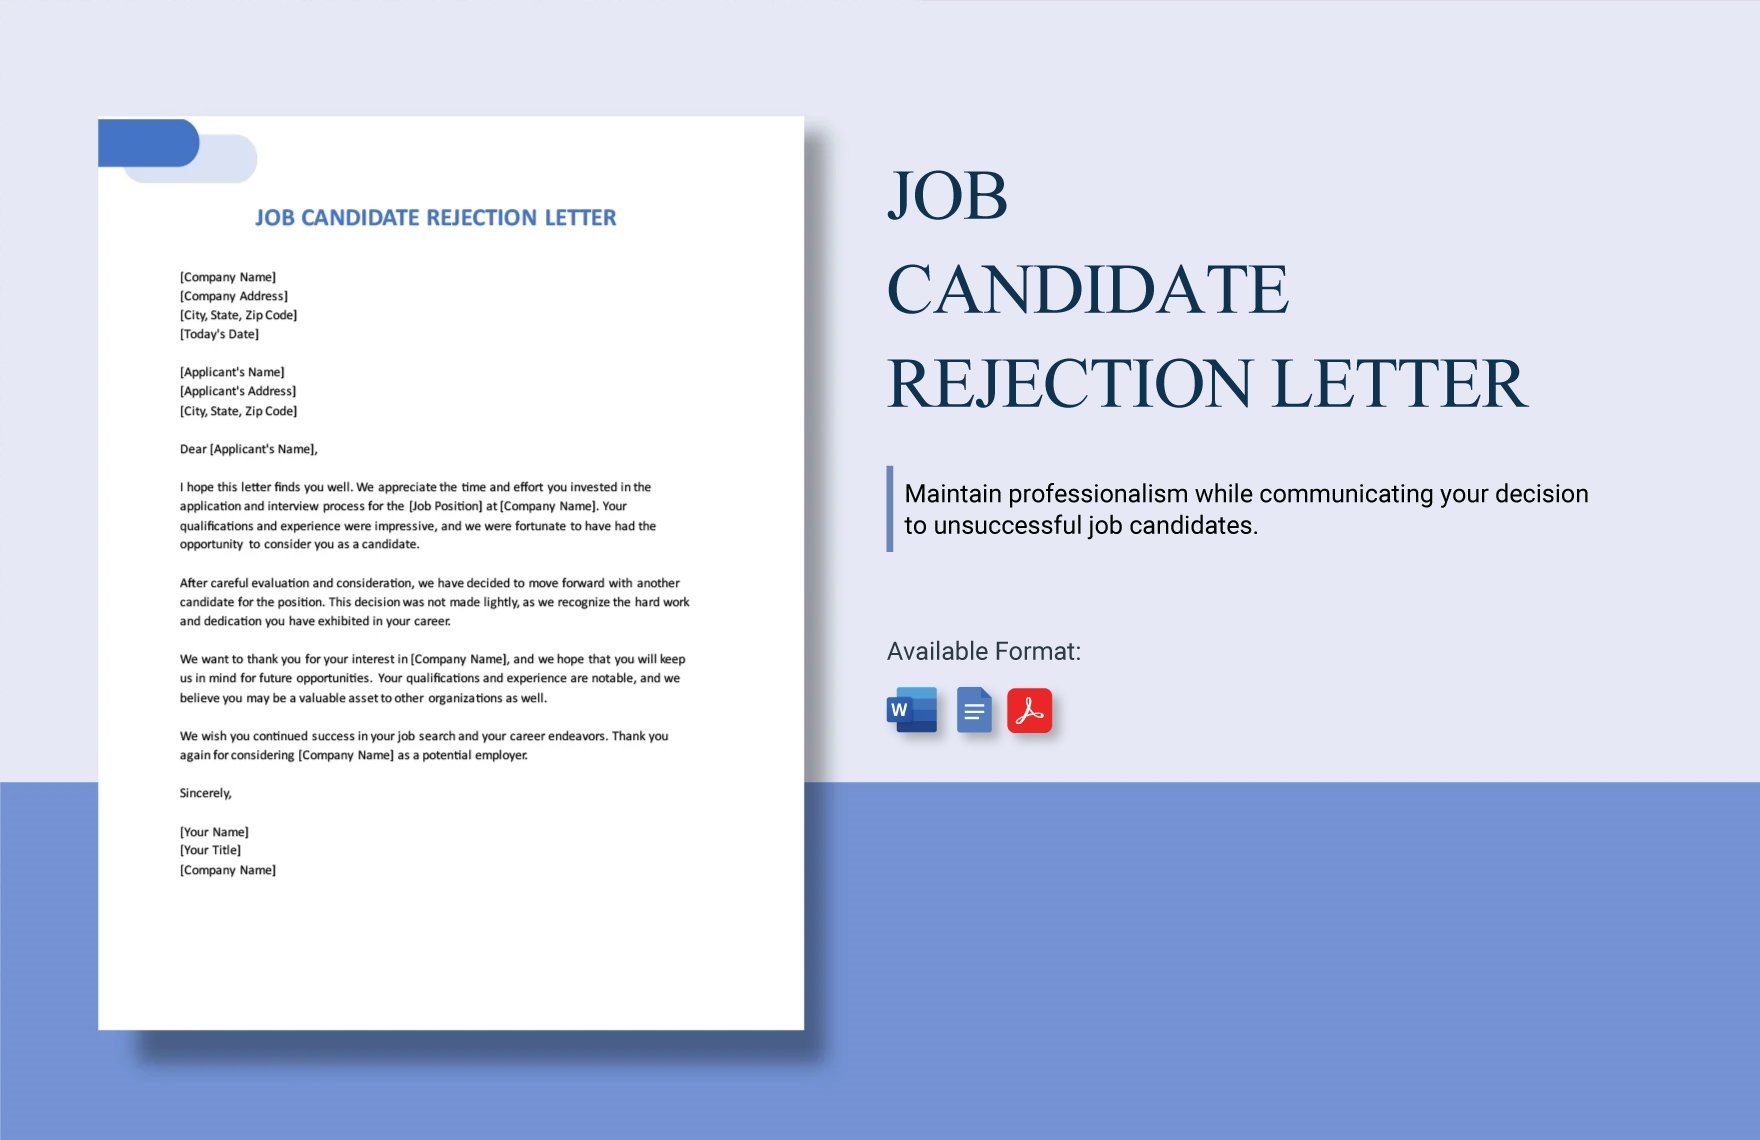 Job Candidate Rejection Letter in Word, Google Docs, PDF